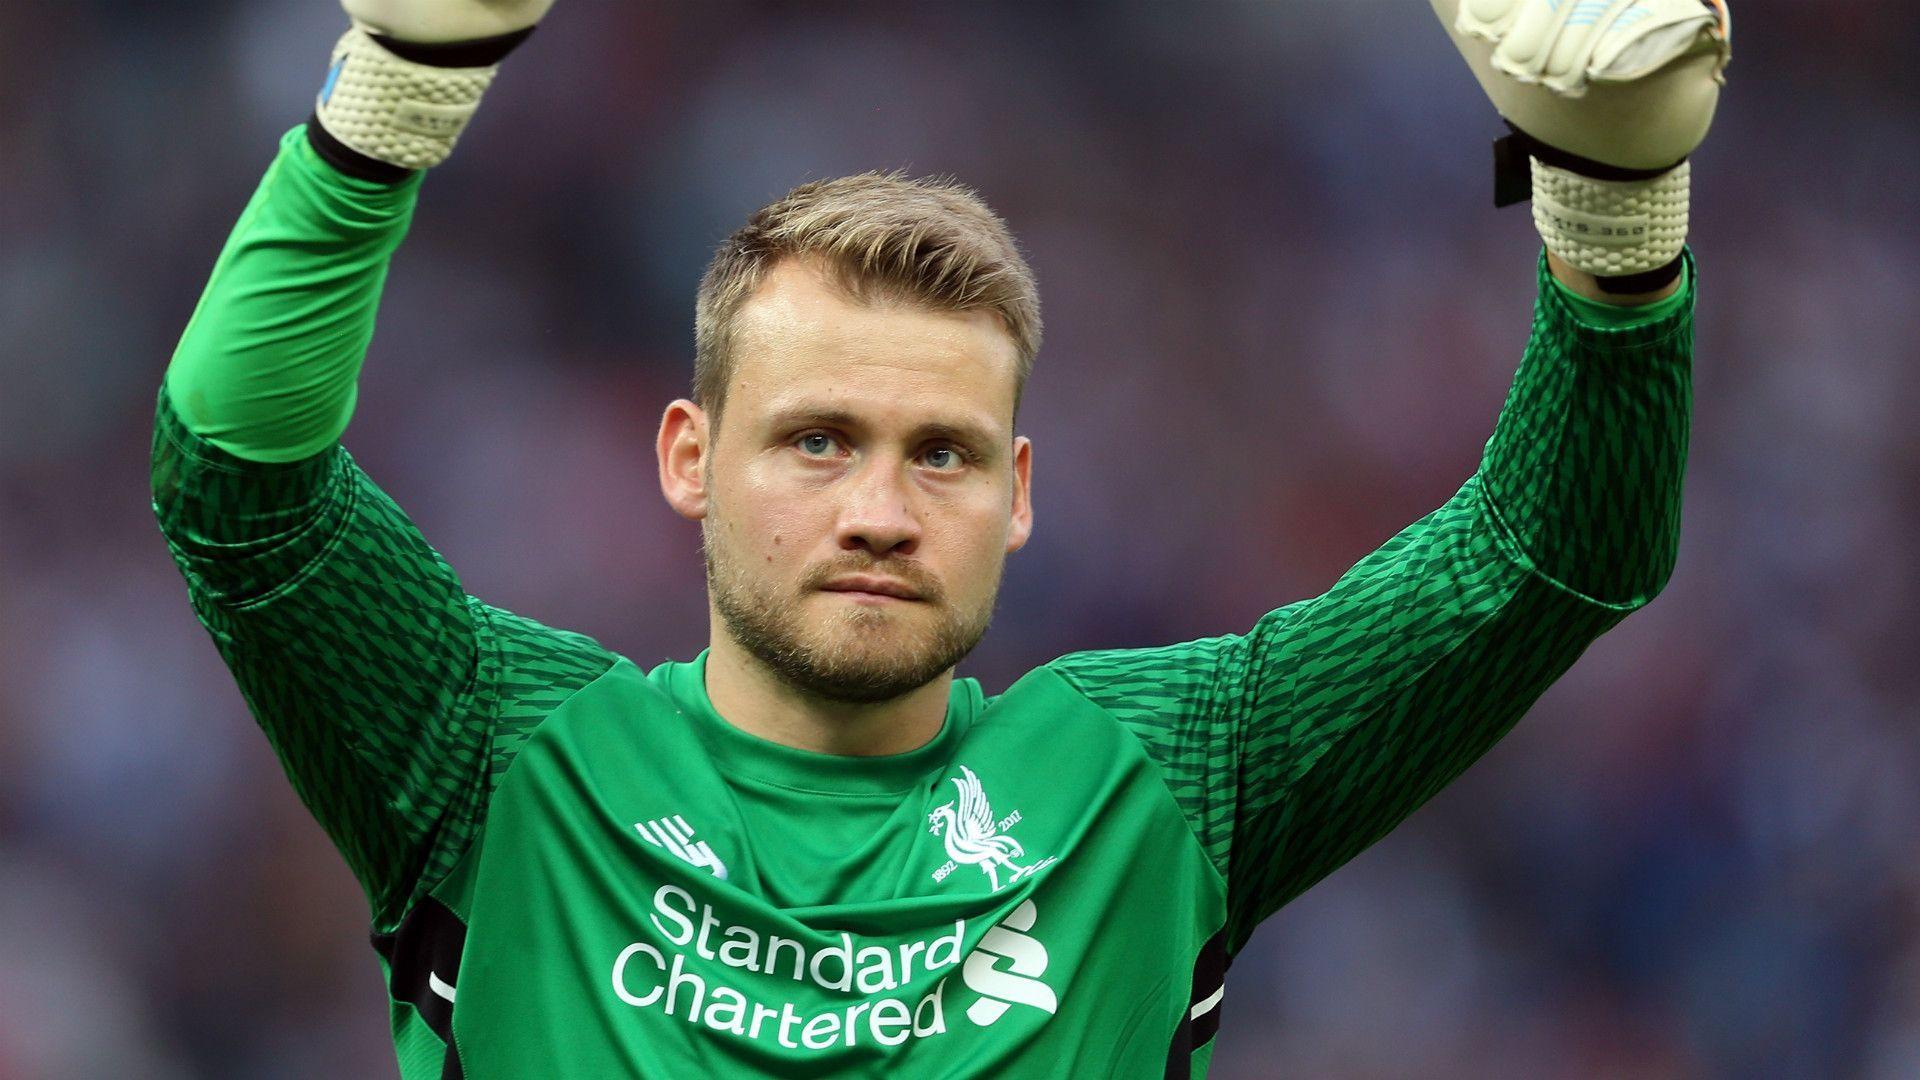 Three goalkeepers Liverpool could sign to replace Simon Mignolet